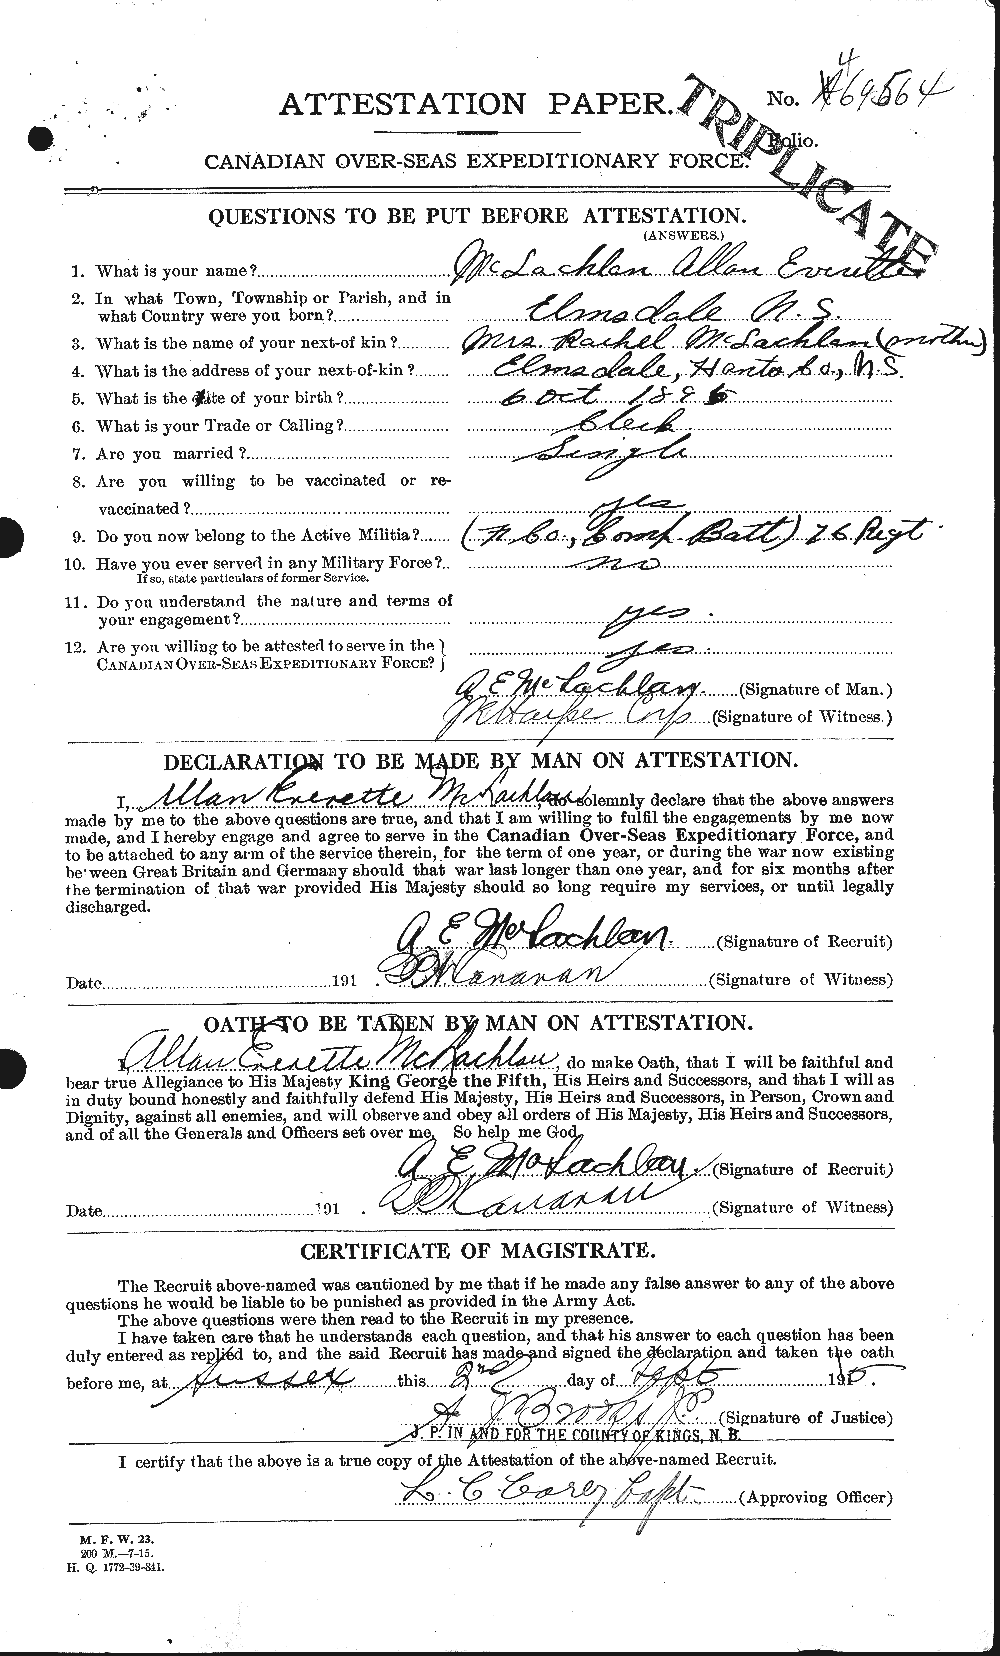 Personnel Records of the First World War - CEF 530814a